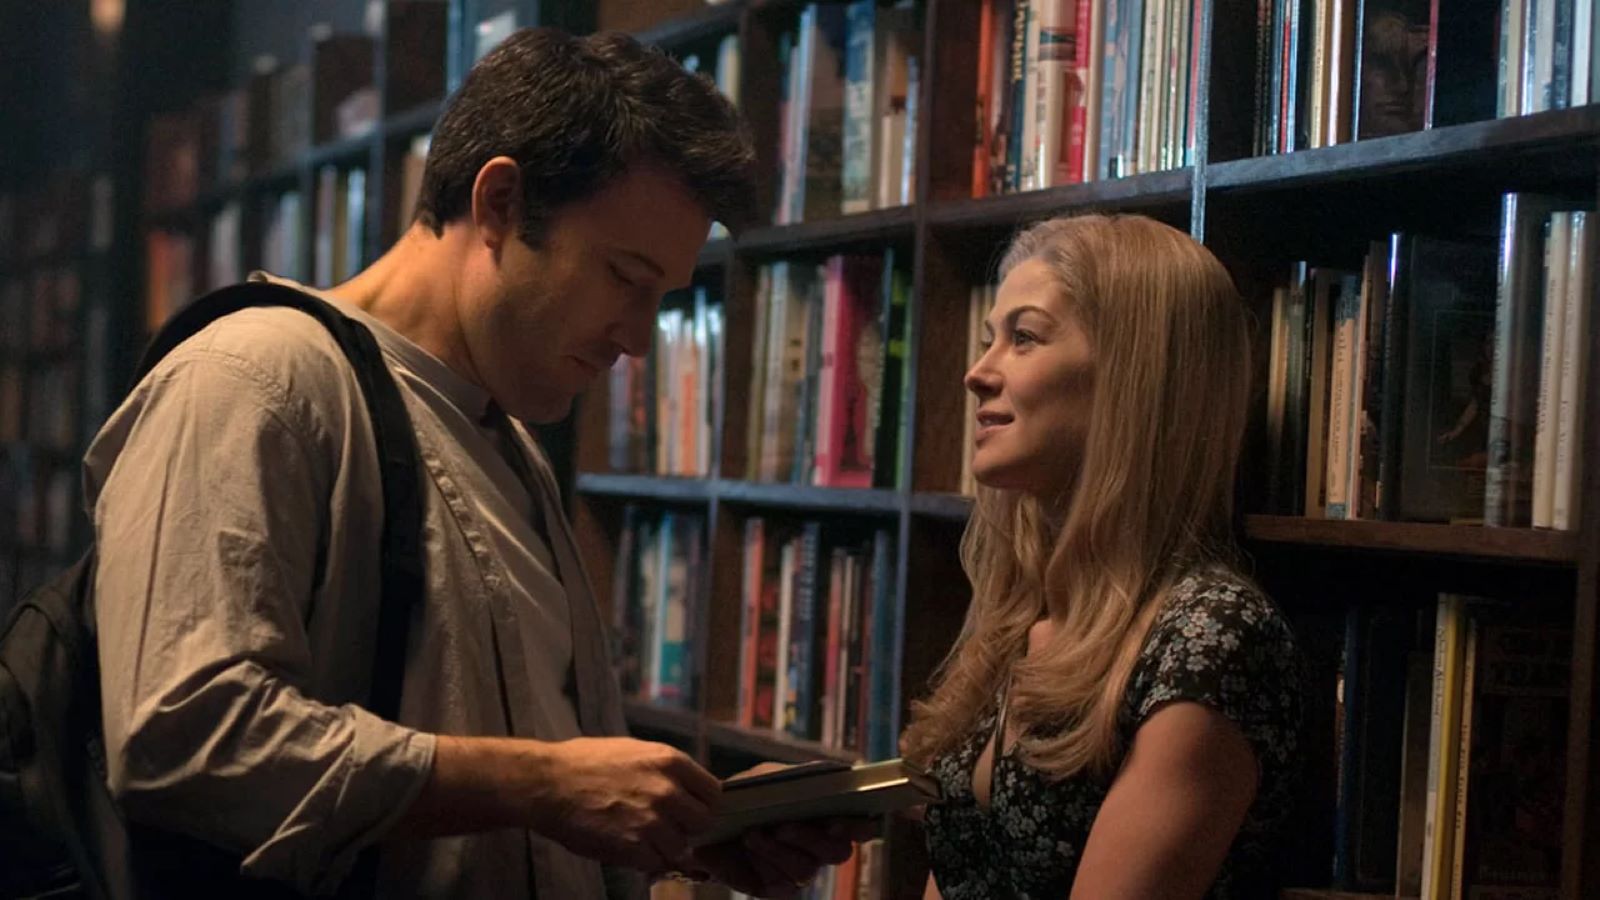 The lying love - Gone Girl tonight on Rai 4: plot and cast of the film by David Fincher with Ben Affleck